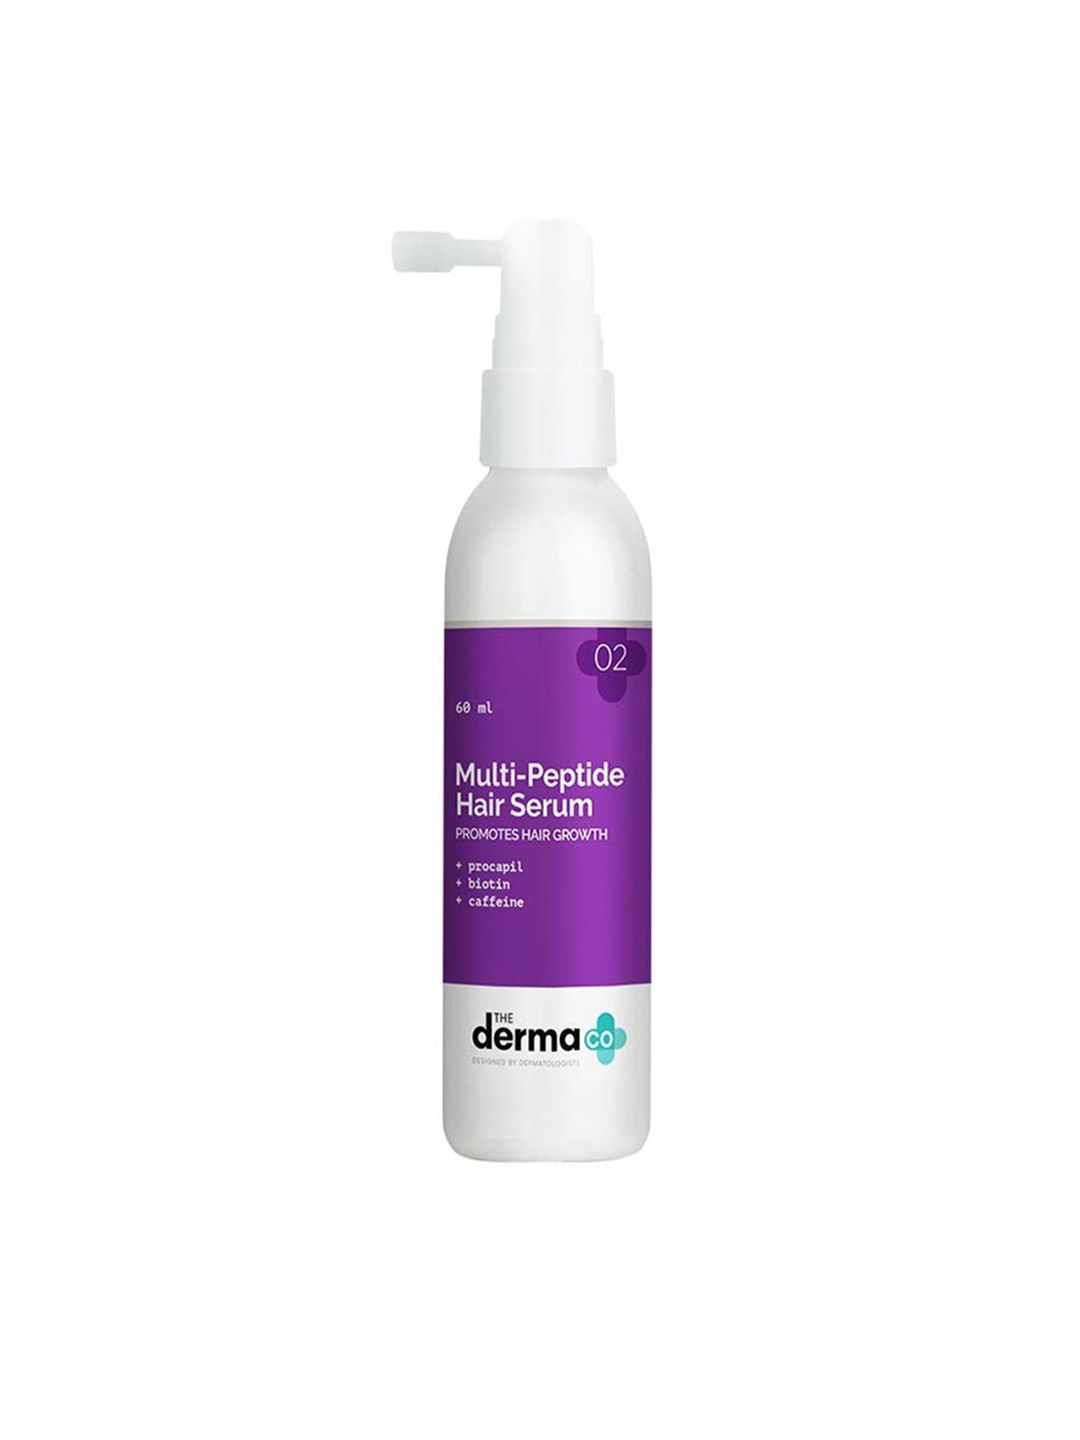 The Derma co. Multi-Peptide Hair Serum for Hair Growth - 60 ml Price in India